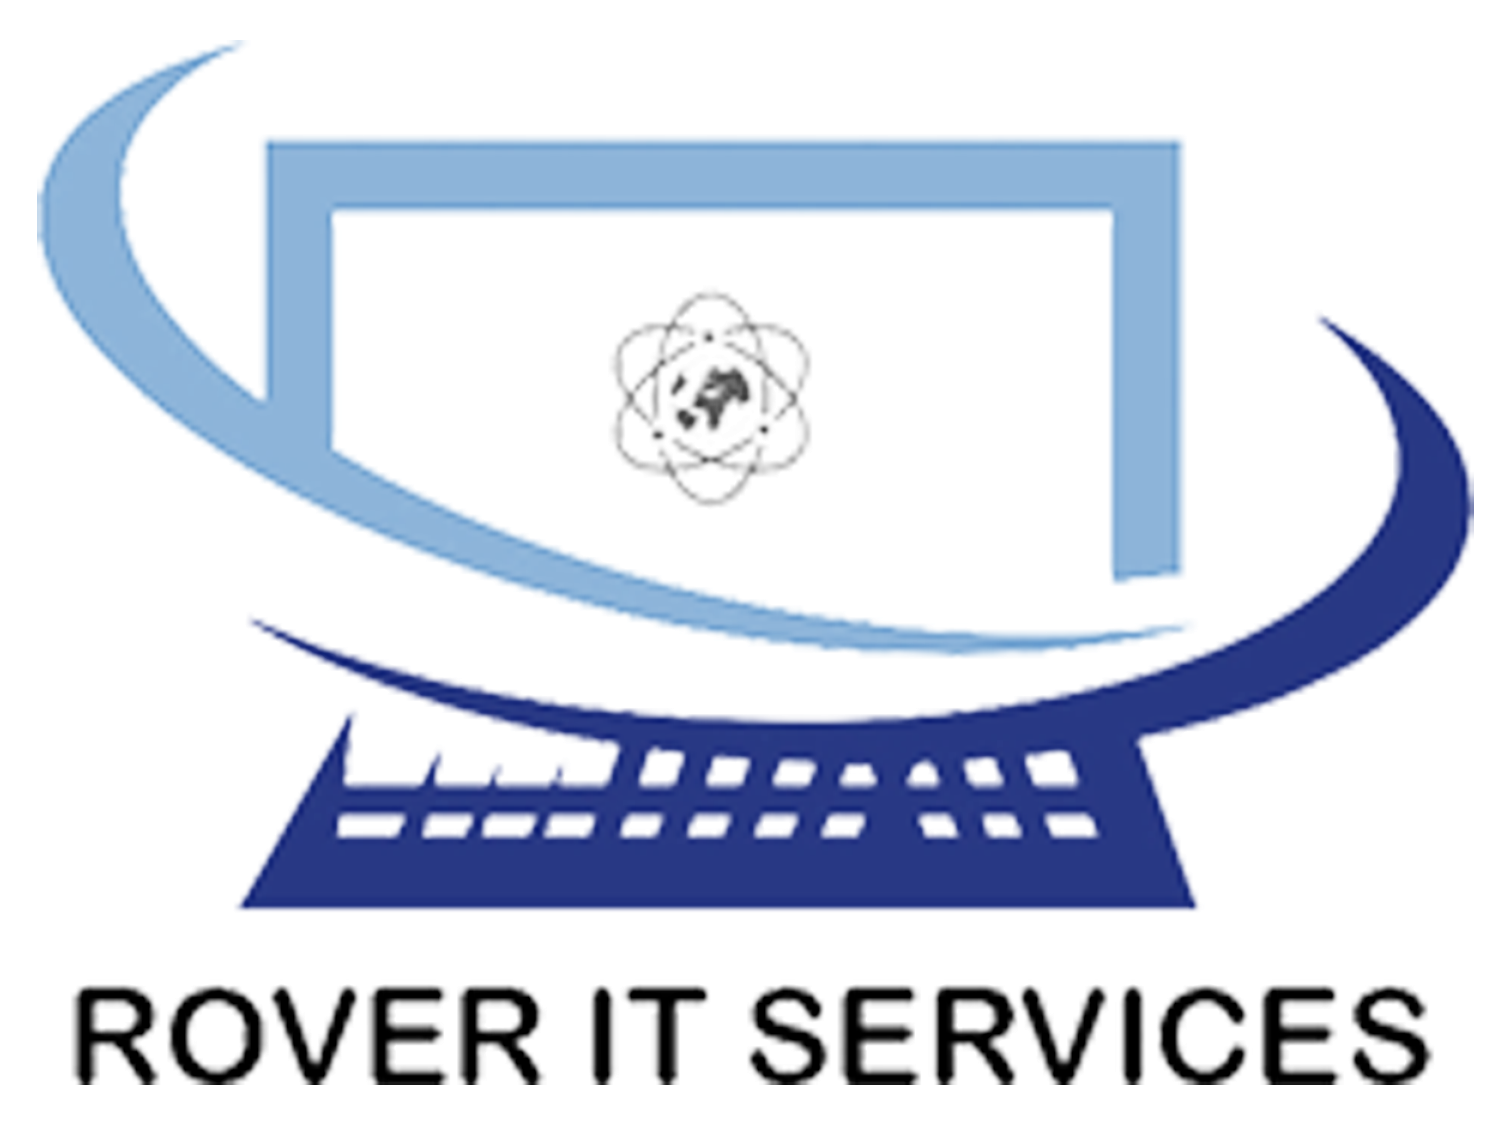 Rover it services